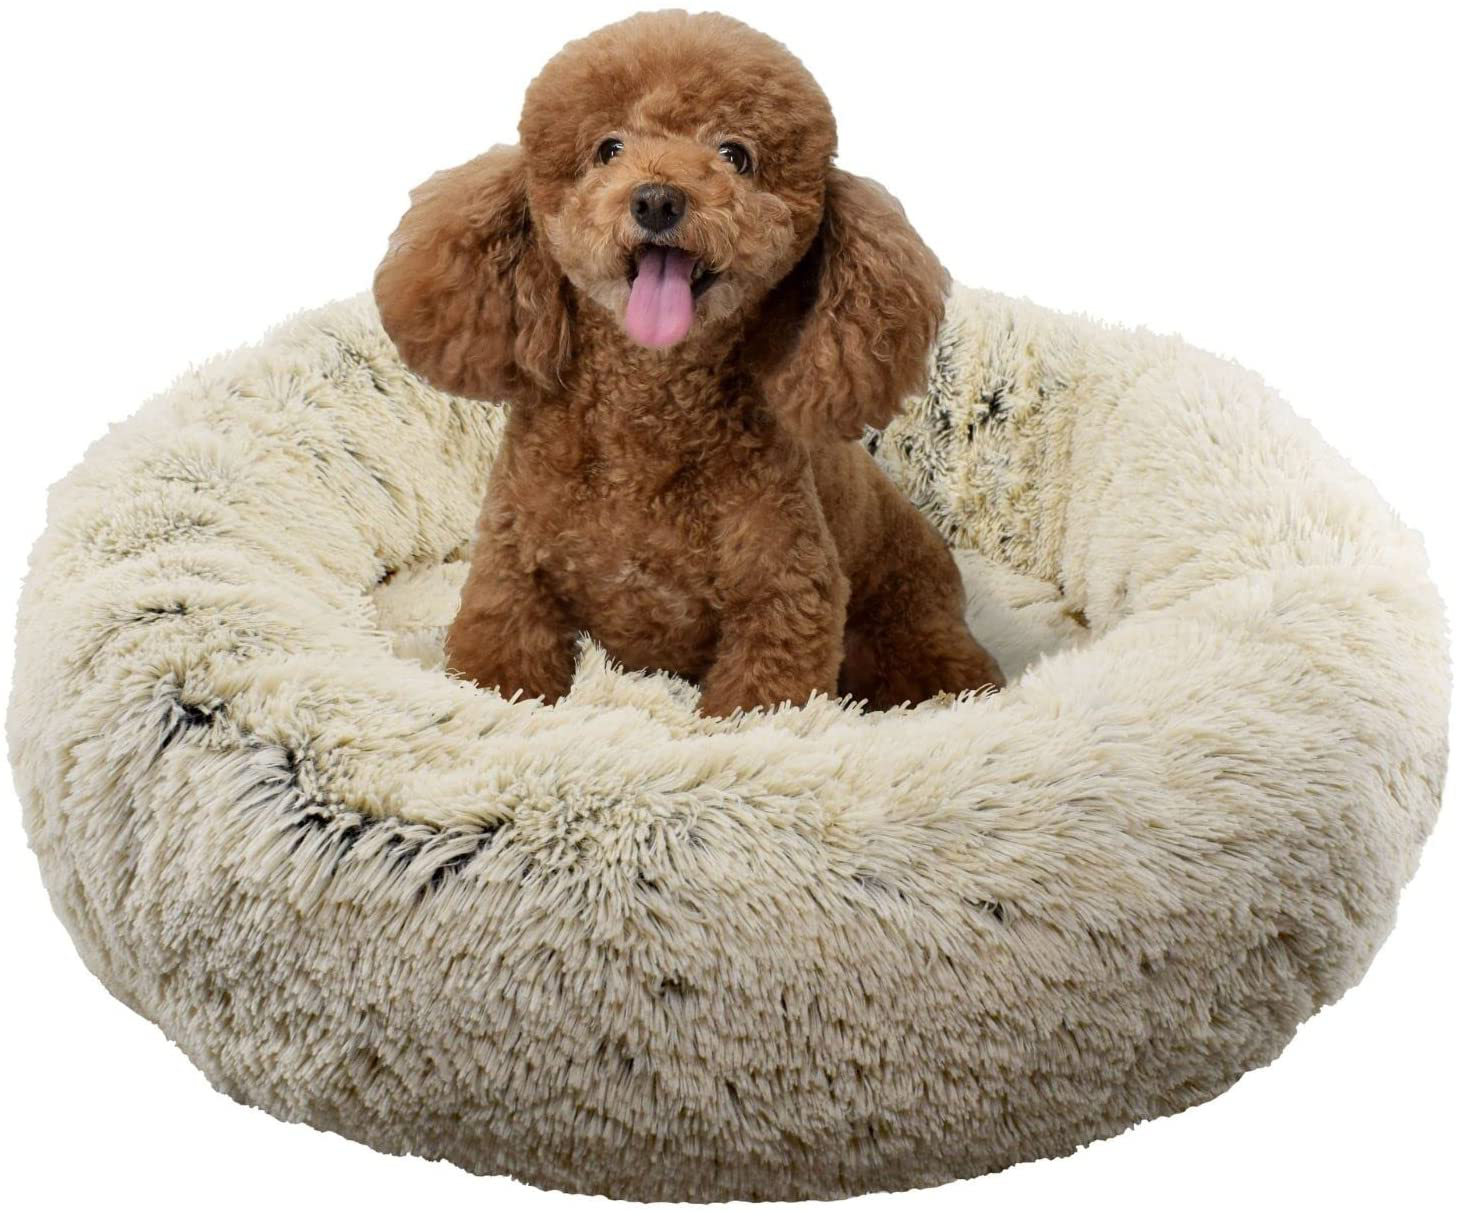 Fuzzball Fluffy Luxe Pet Bed, Calming Donut Cuddler – Machine Washable, Waterproof Base, Anti-Slip (For Small Dogs and Cats up to 25Lbs)